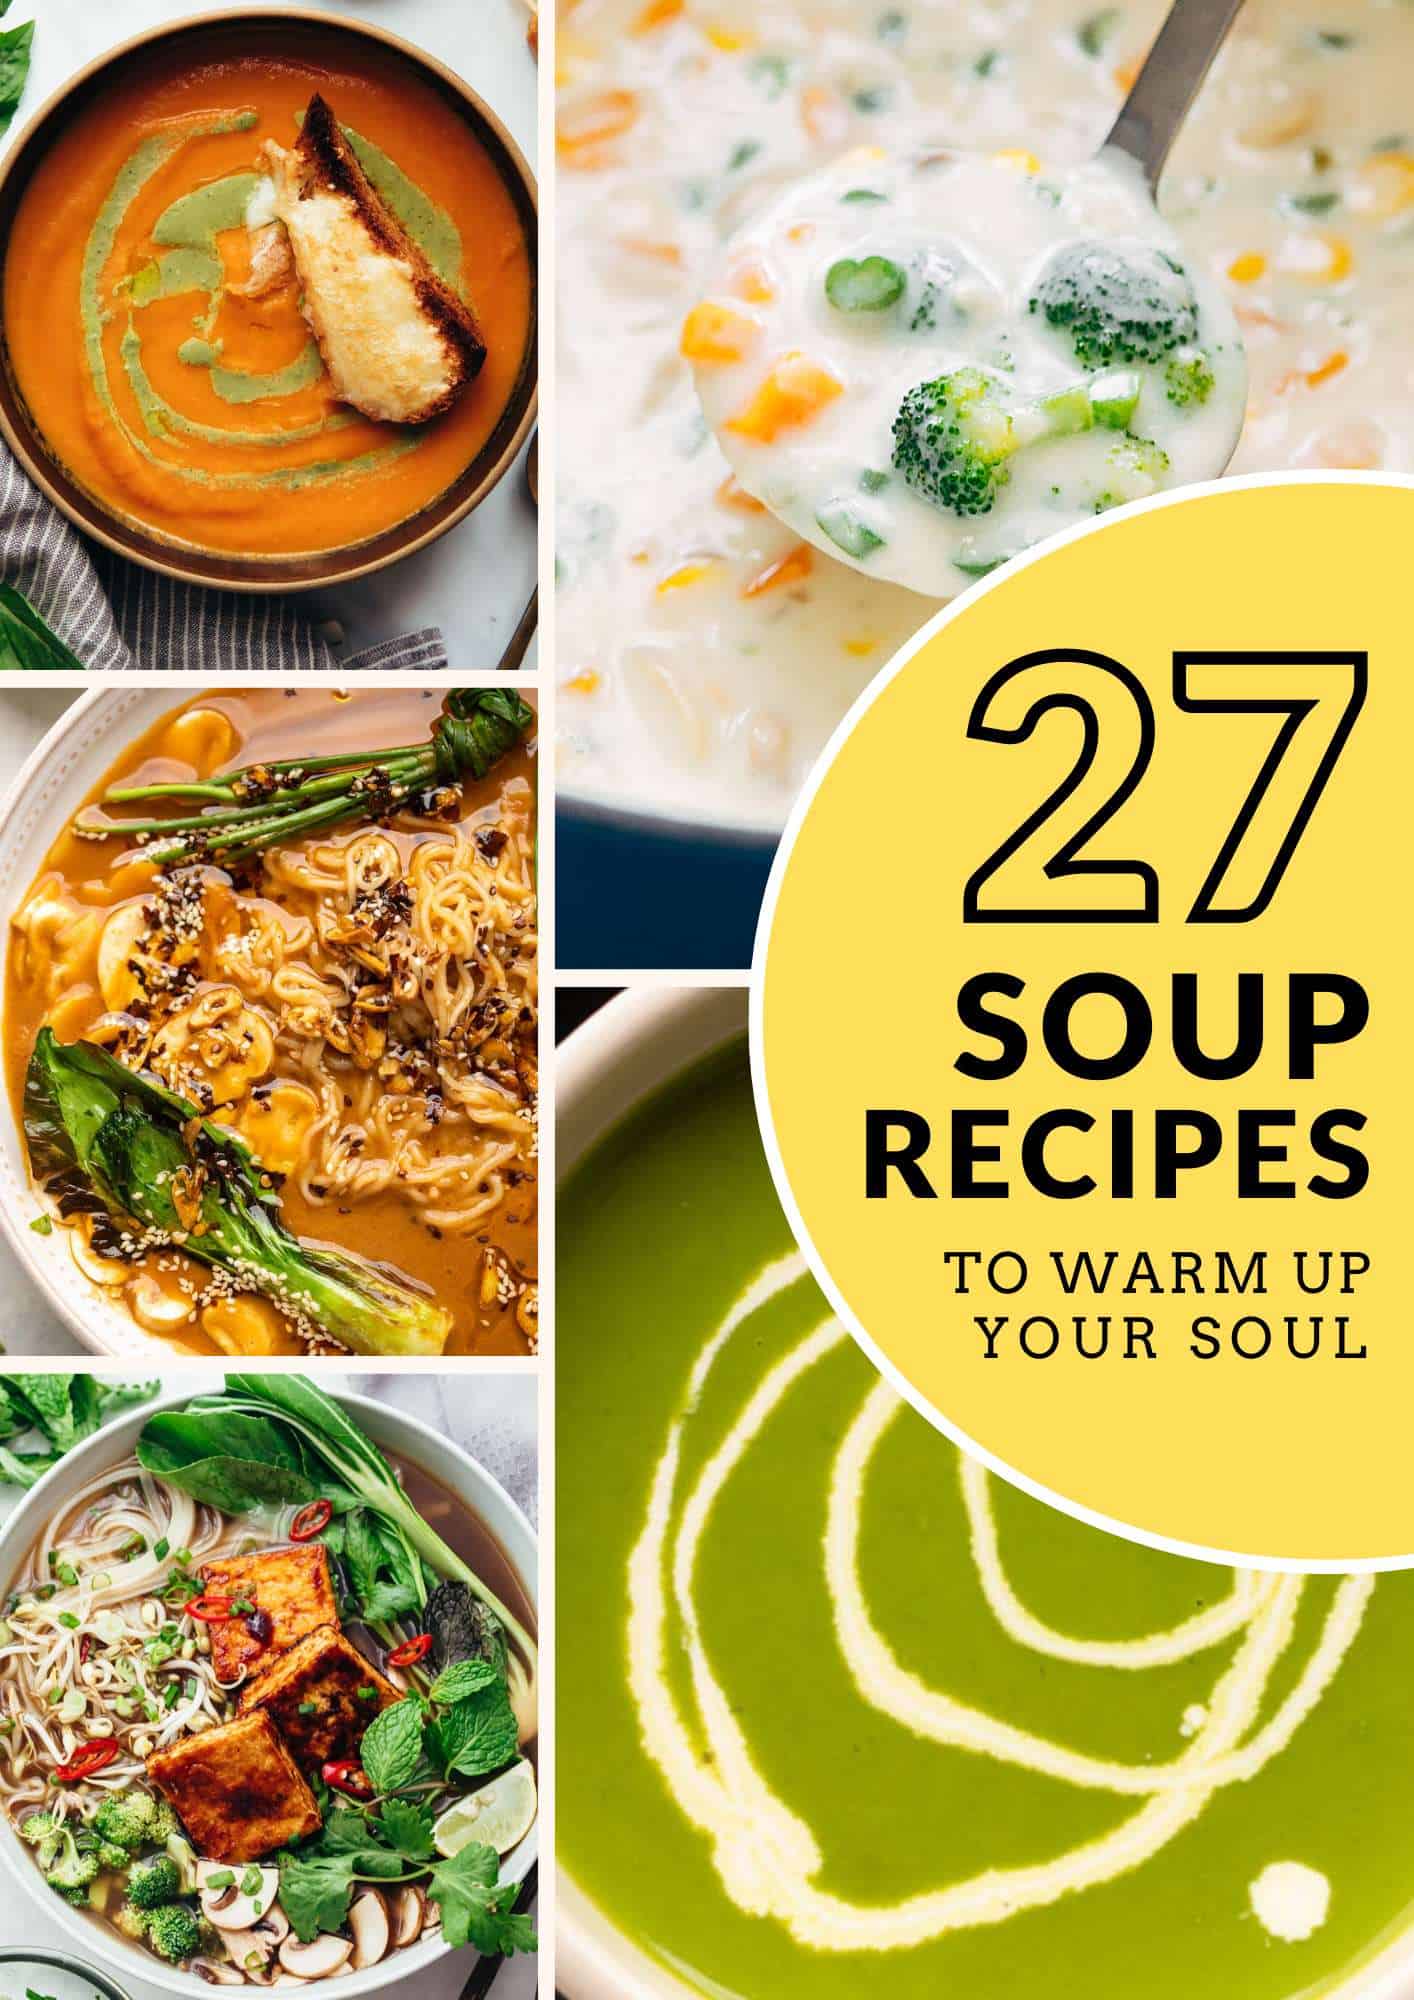 Picture collage showing soup photos with text overlay